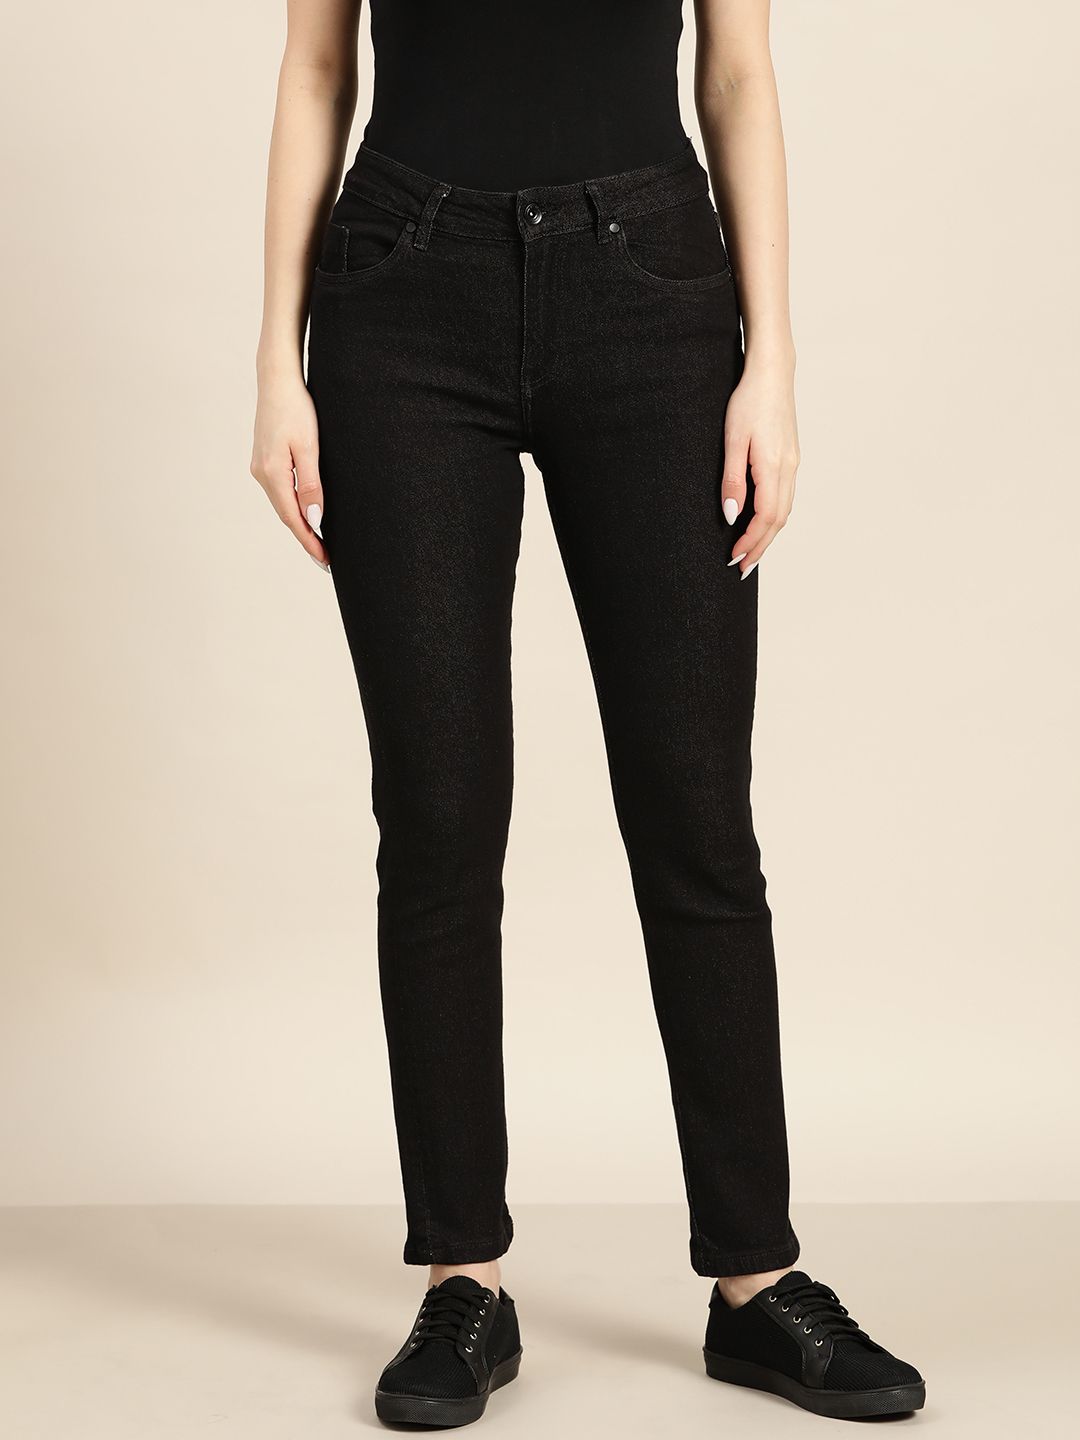 ether Women Black Slim Fit Stretchable Jeans Price in India